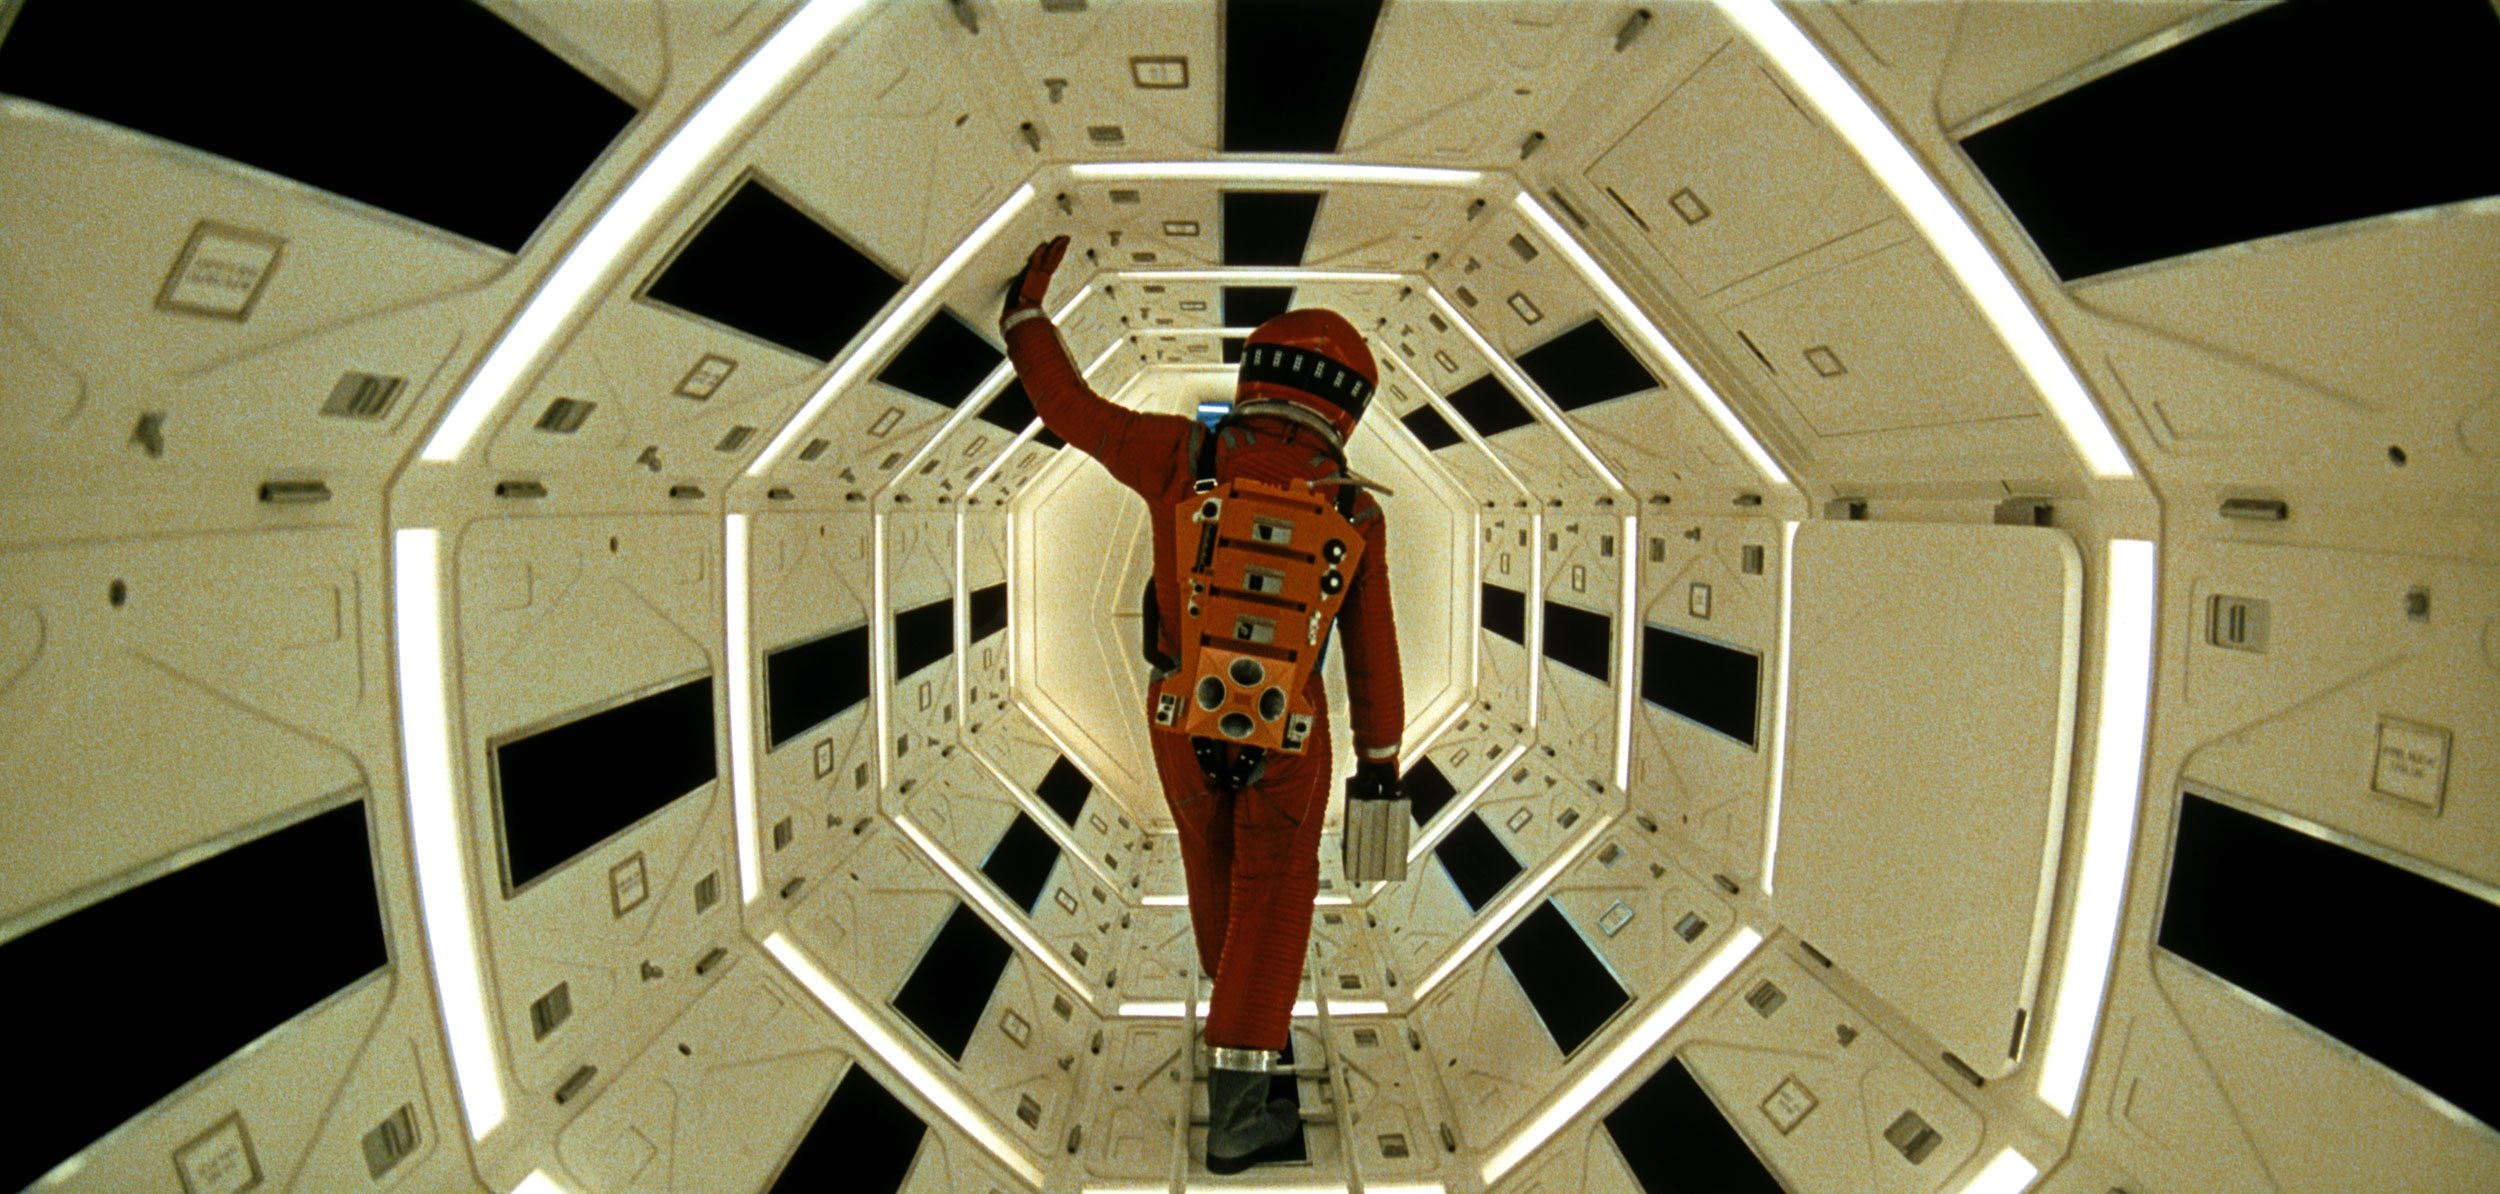 2001 A Space Odyssey Download